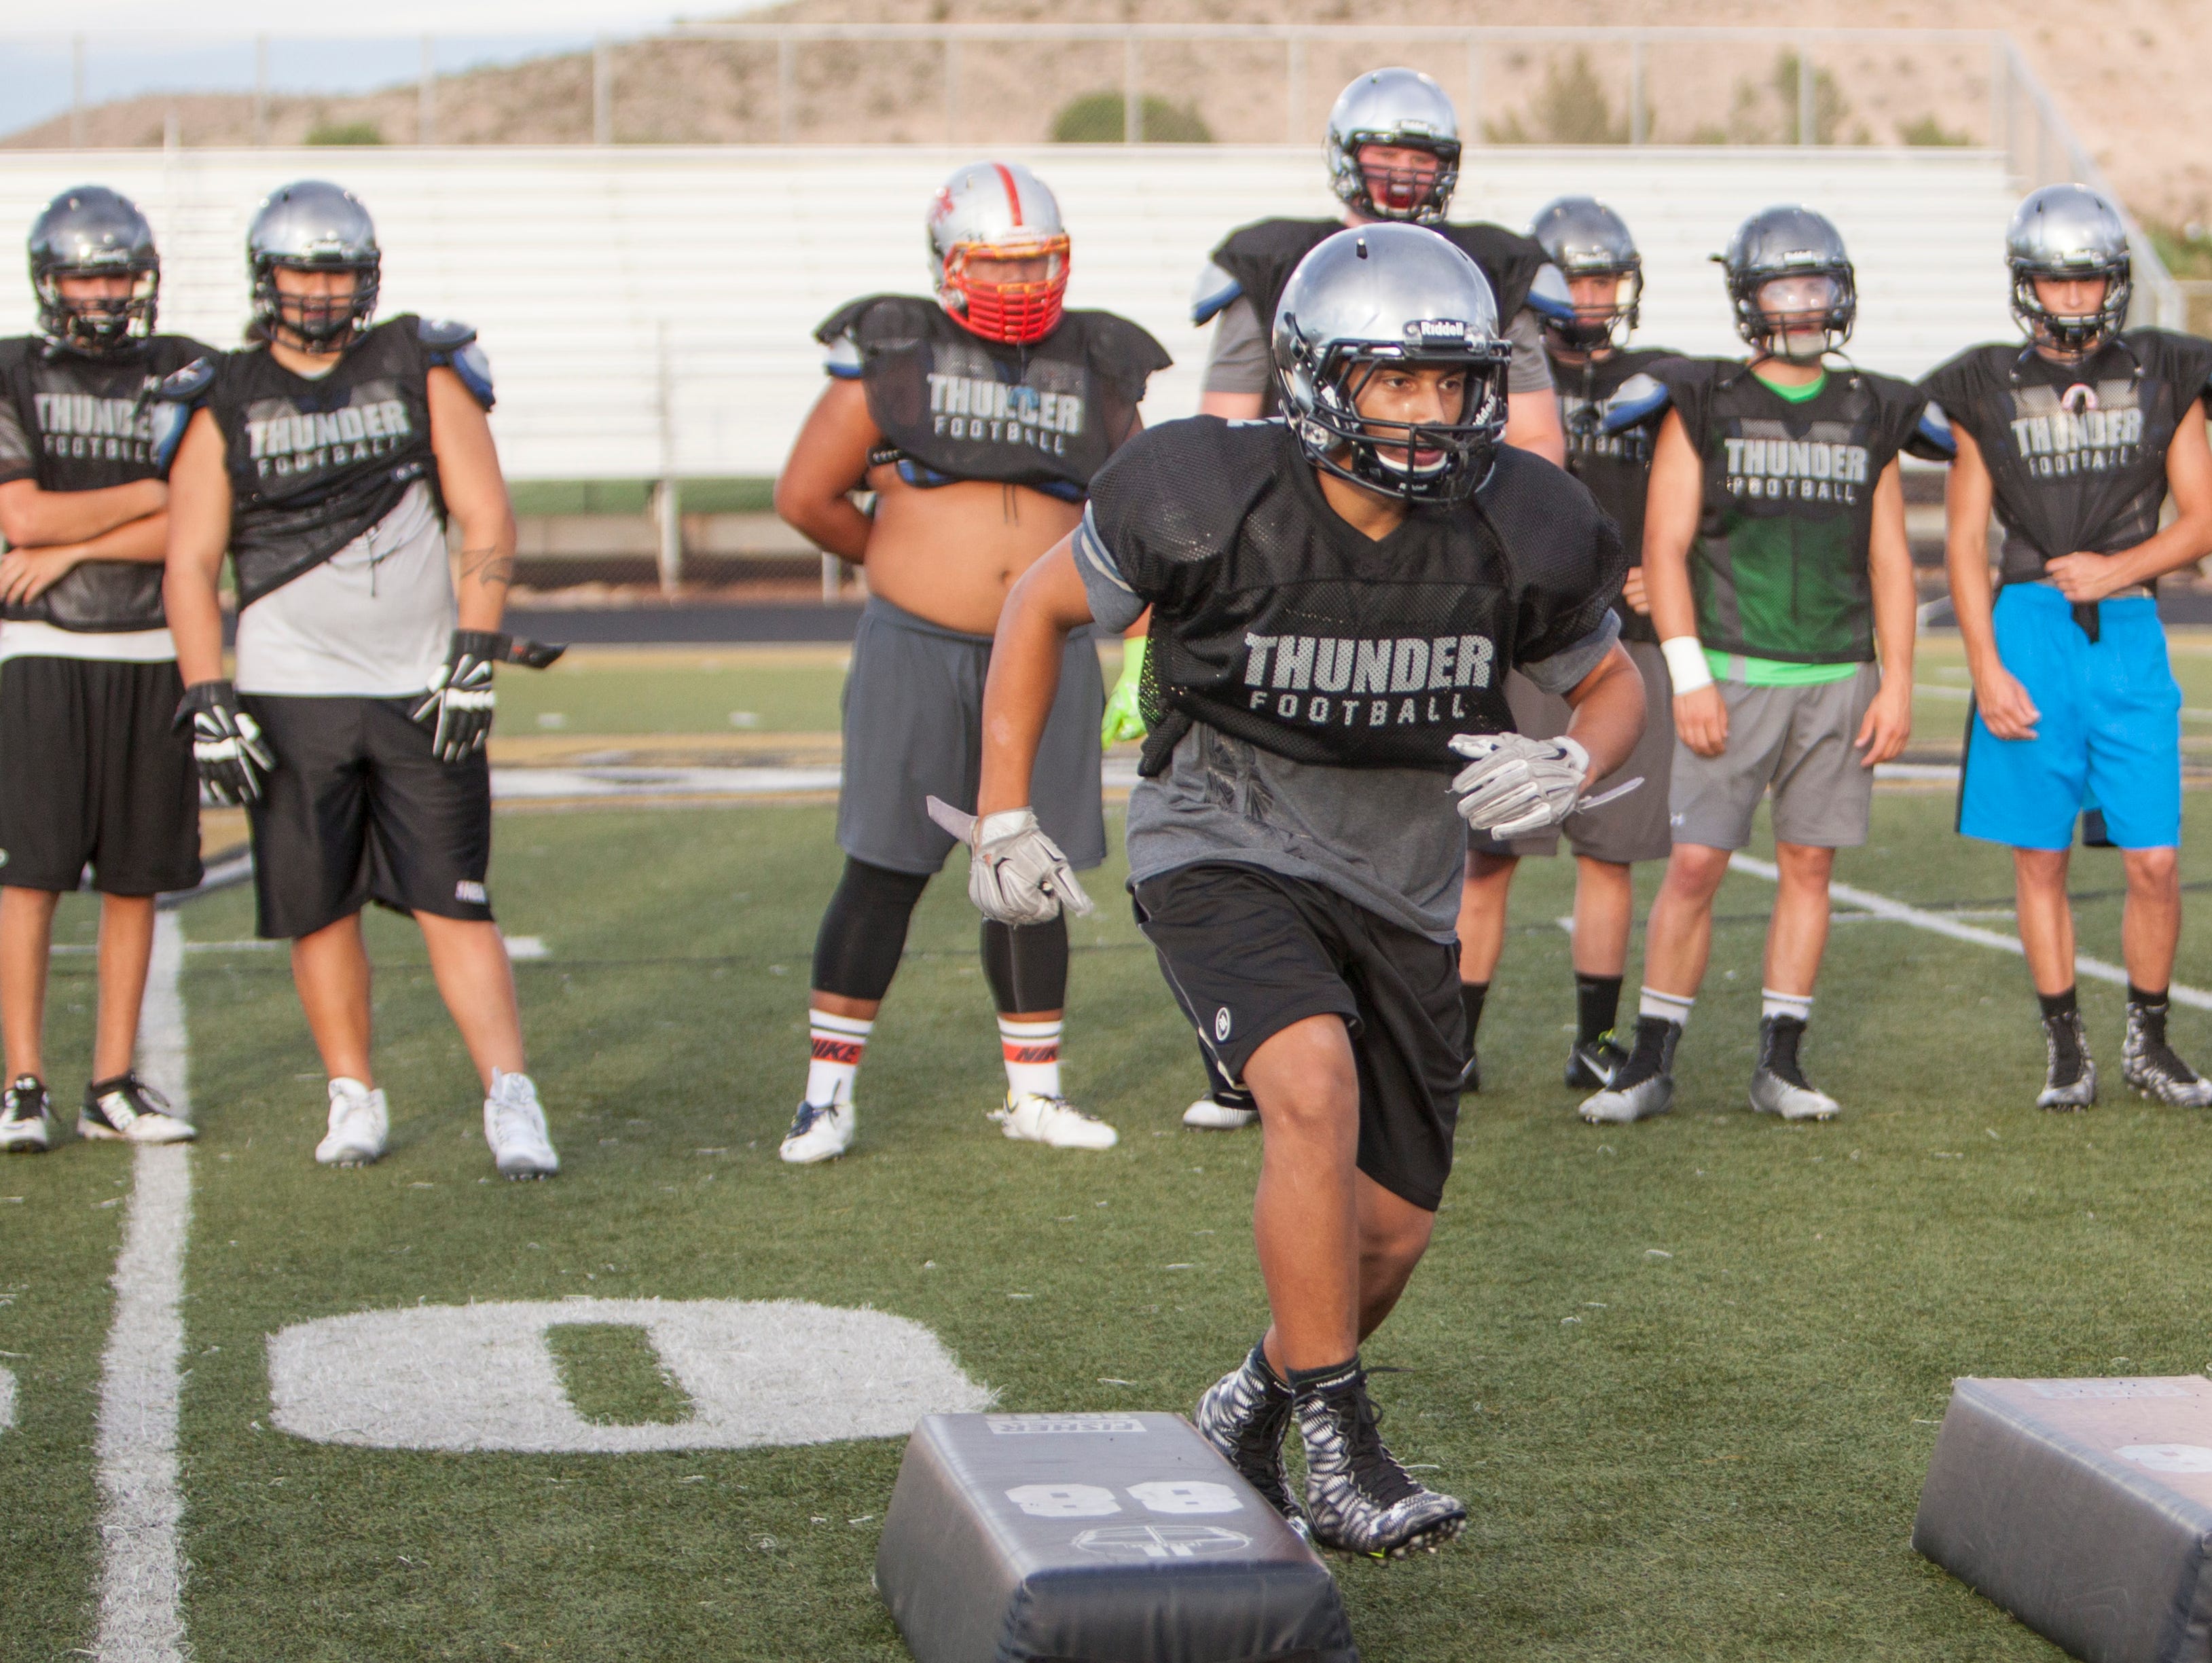 Media and coaches voted Desert Hills as the preseason favorite to win the 3AA South Region.